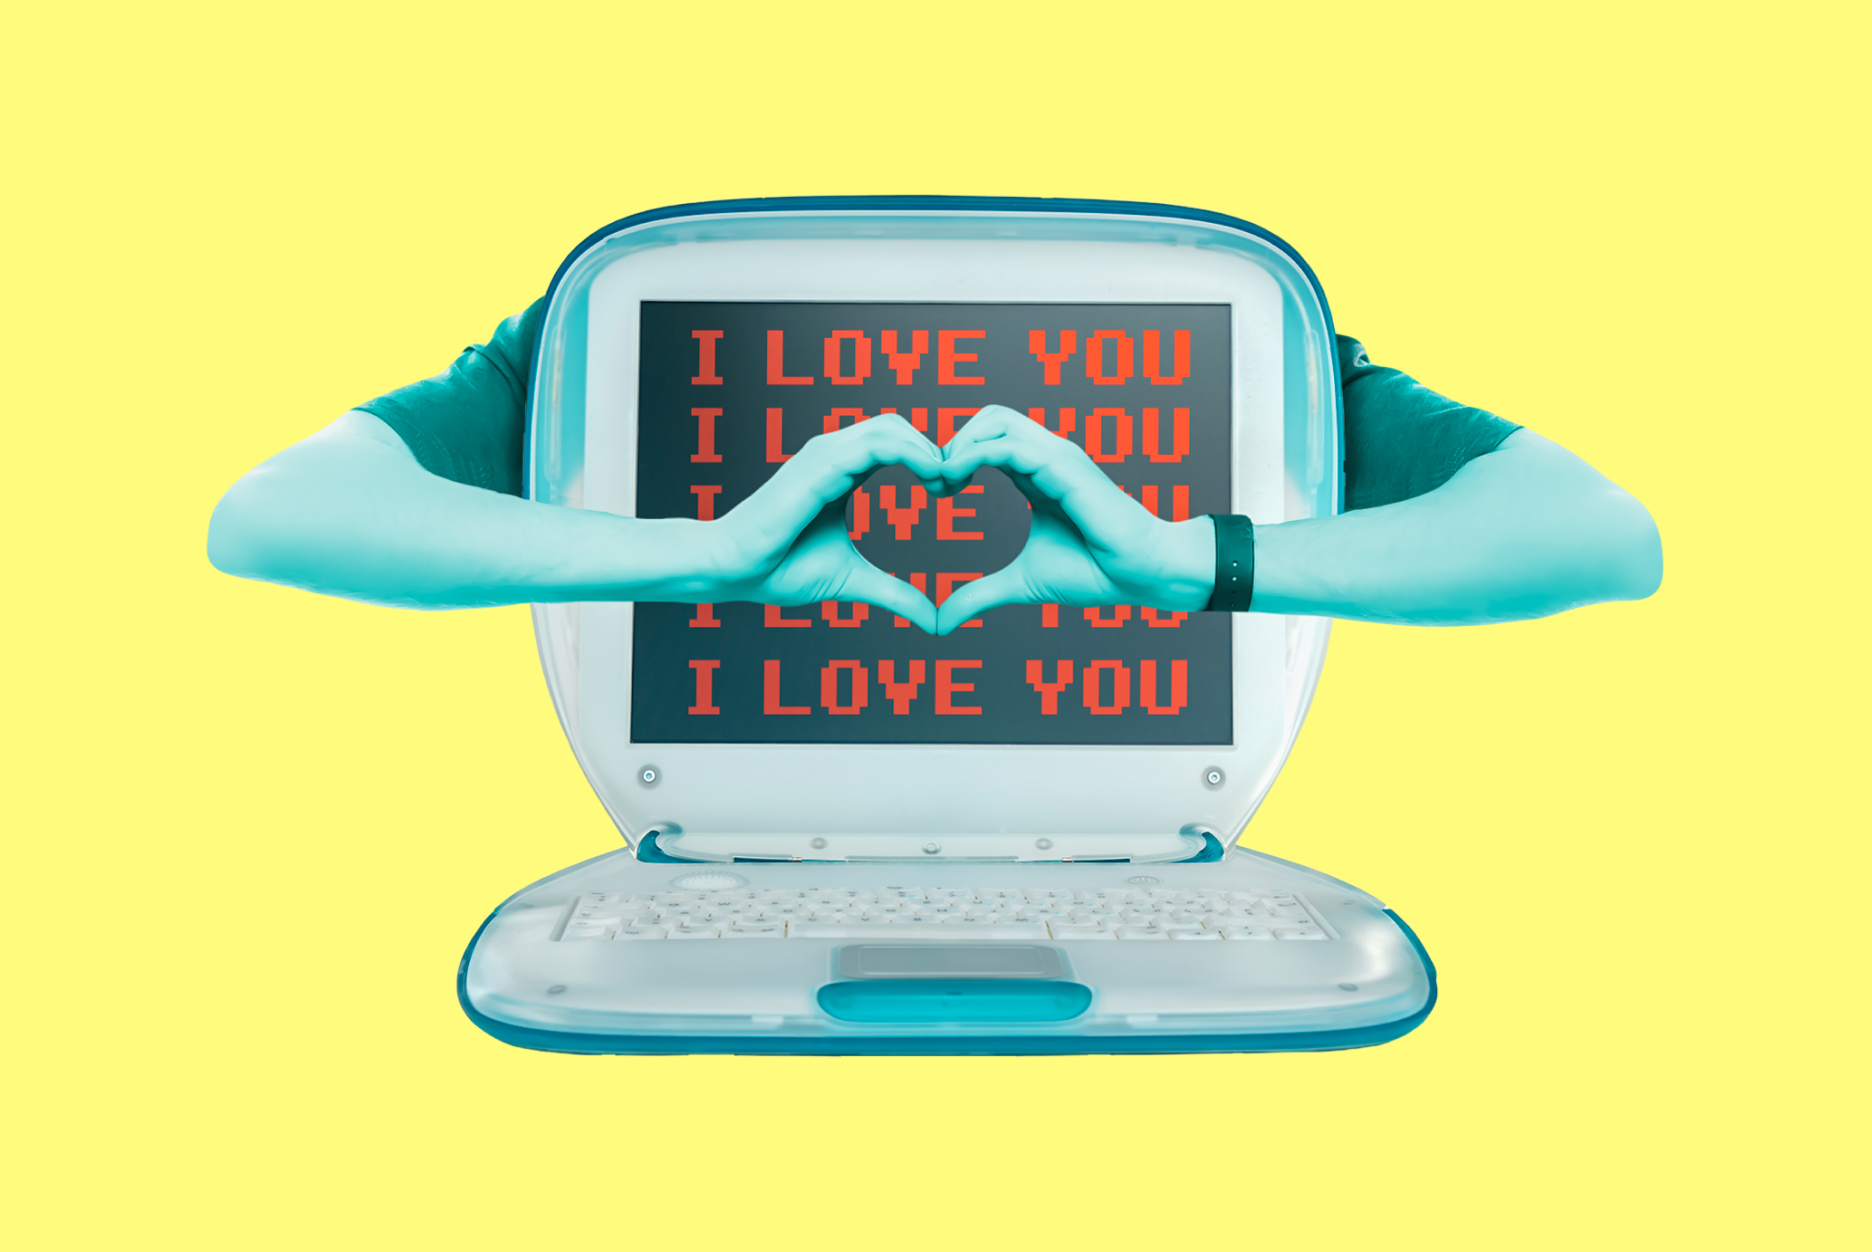 01_IGraphic showing a laptop with a hands around it creating a heart shape and I LOVE YOU words in the screenLOVEYOU Virus